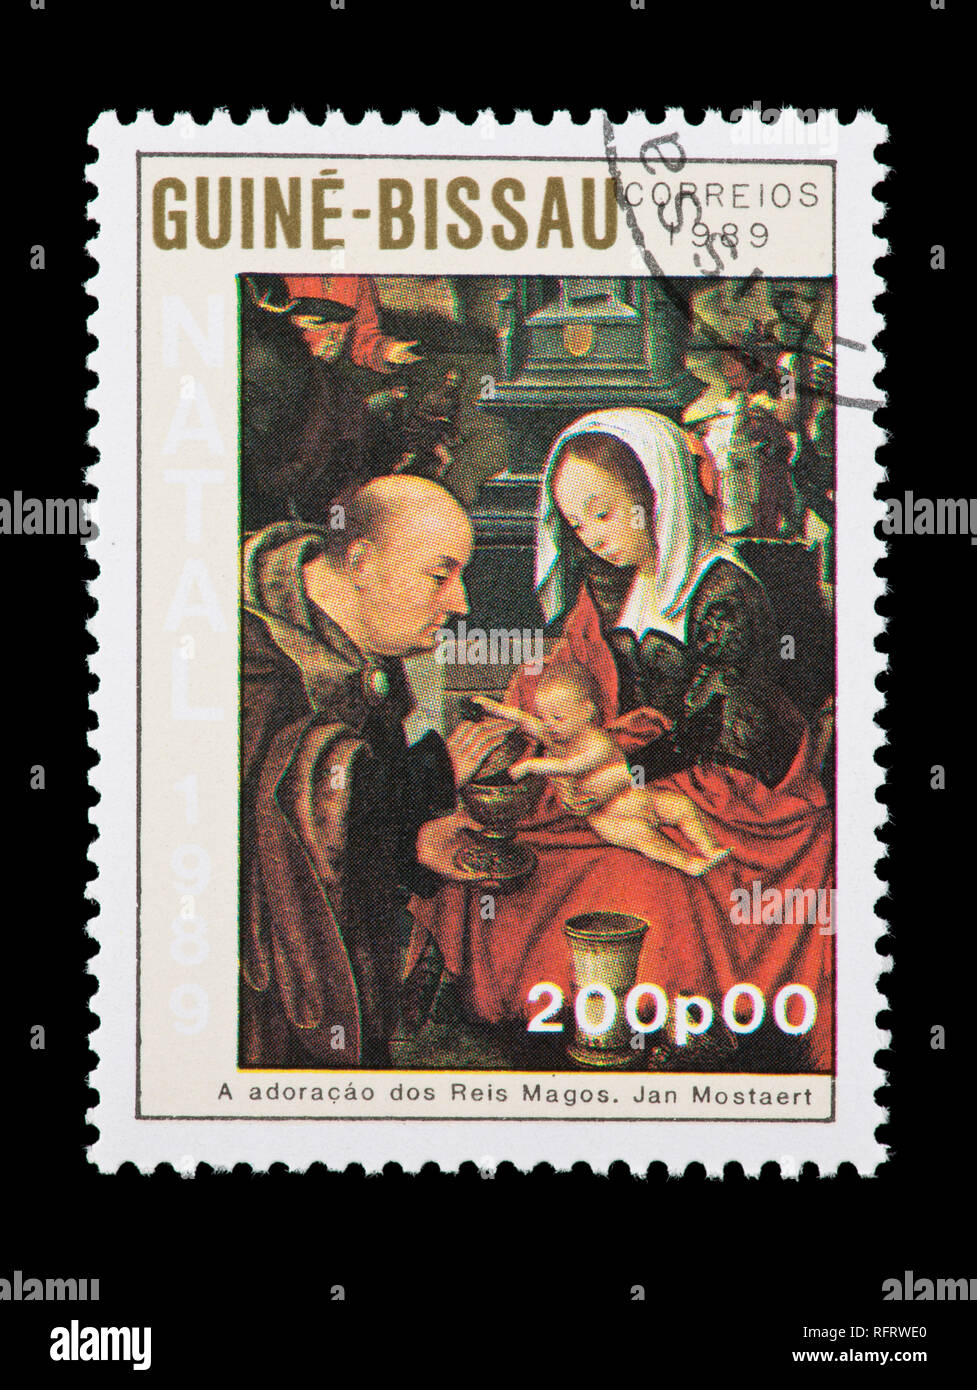 Postage stamp from Guinea-Bissau depicting the Mostaert painting of the Madonna and Child. Stock Photo